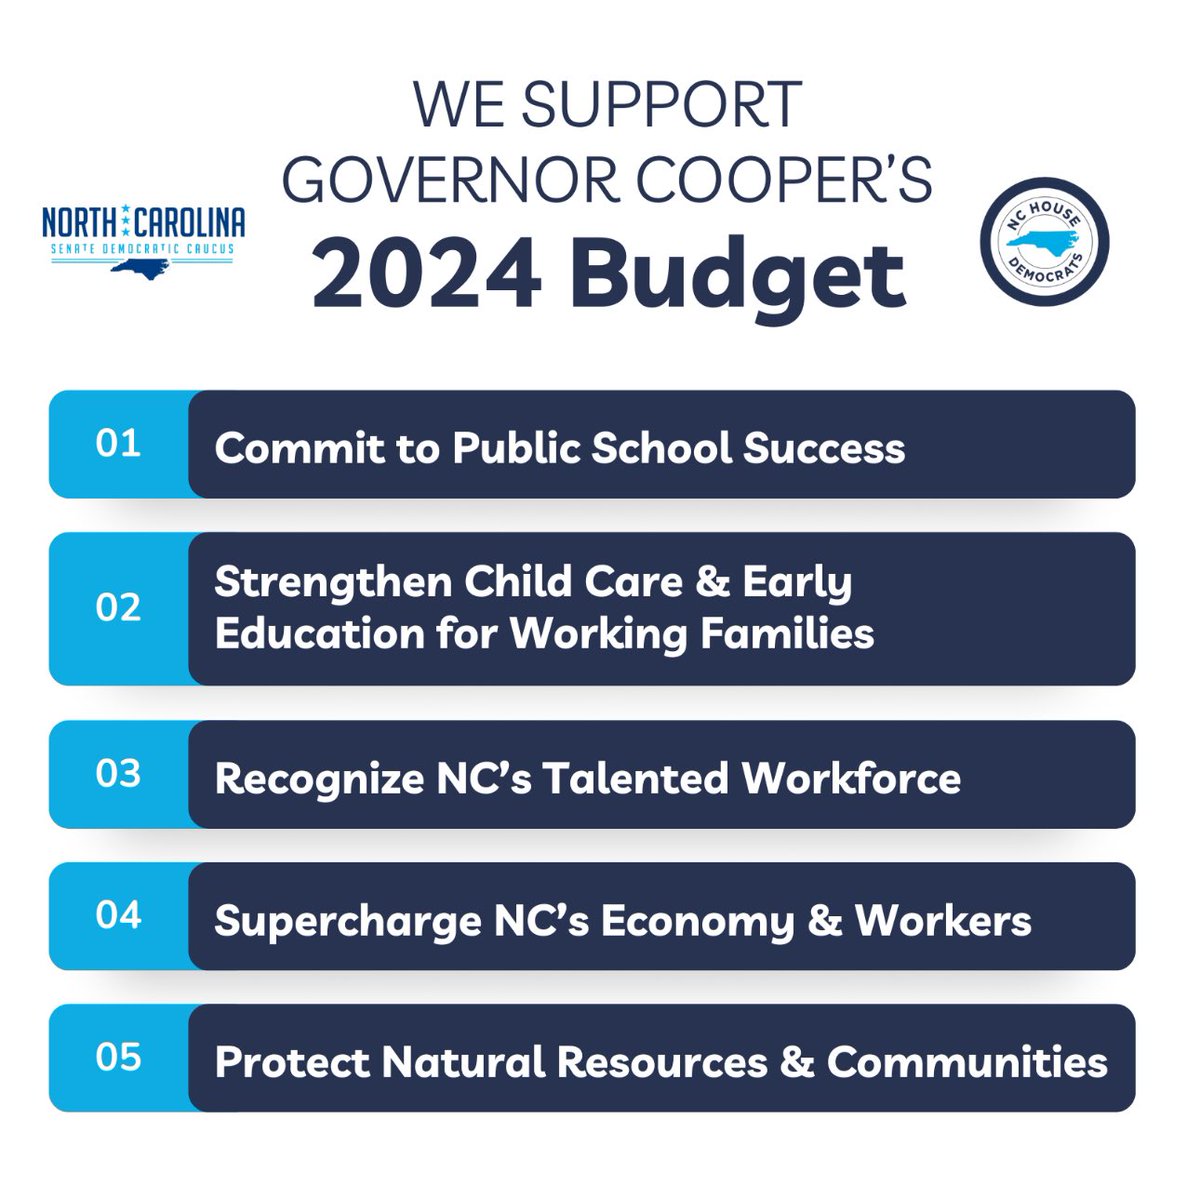 Below are some of the highlights from Gov. Cooper’s budget proposal. This budget makes the right investments at the right time for North Carolina.